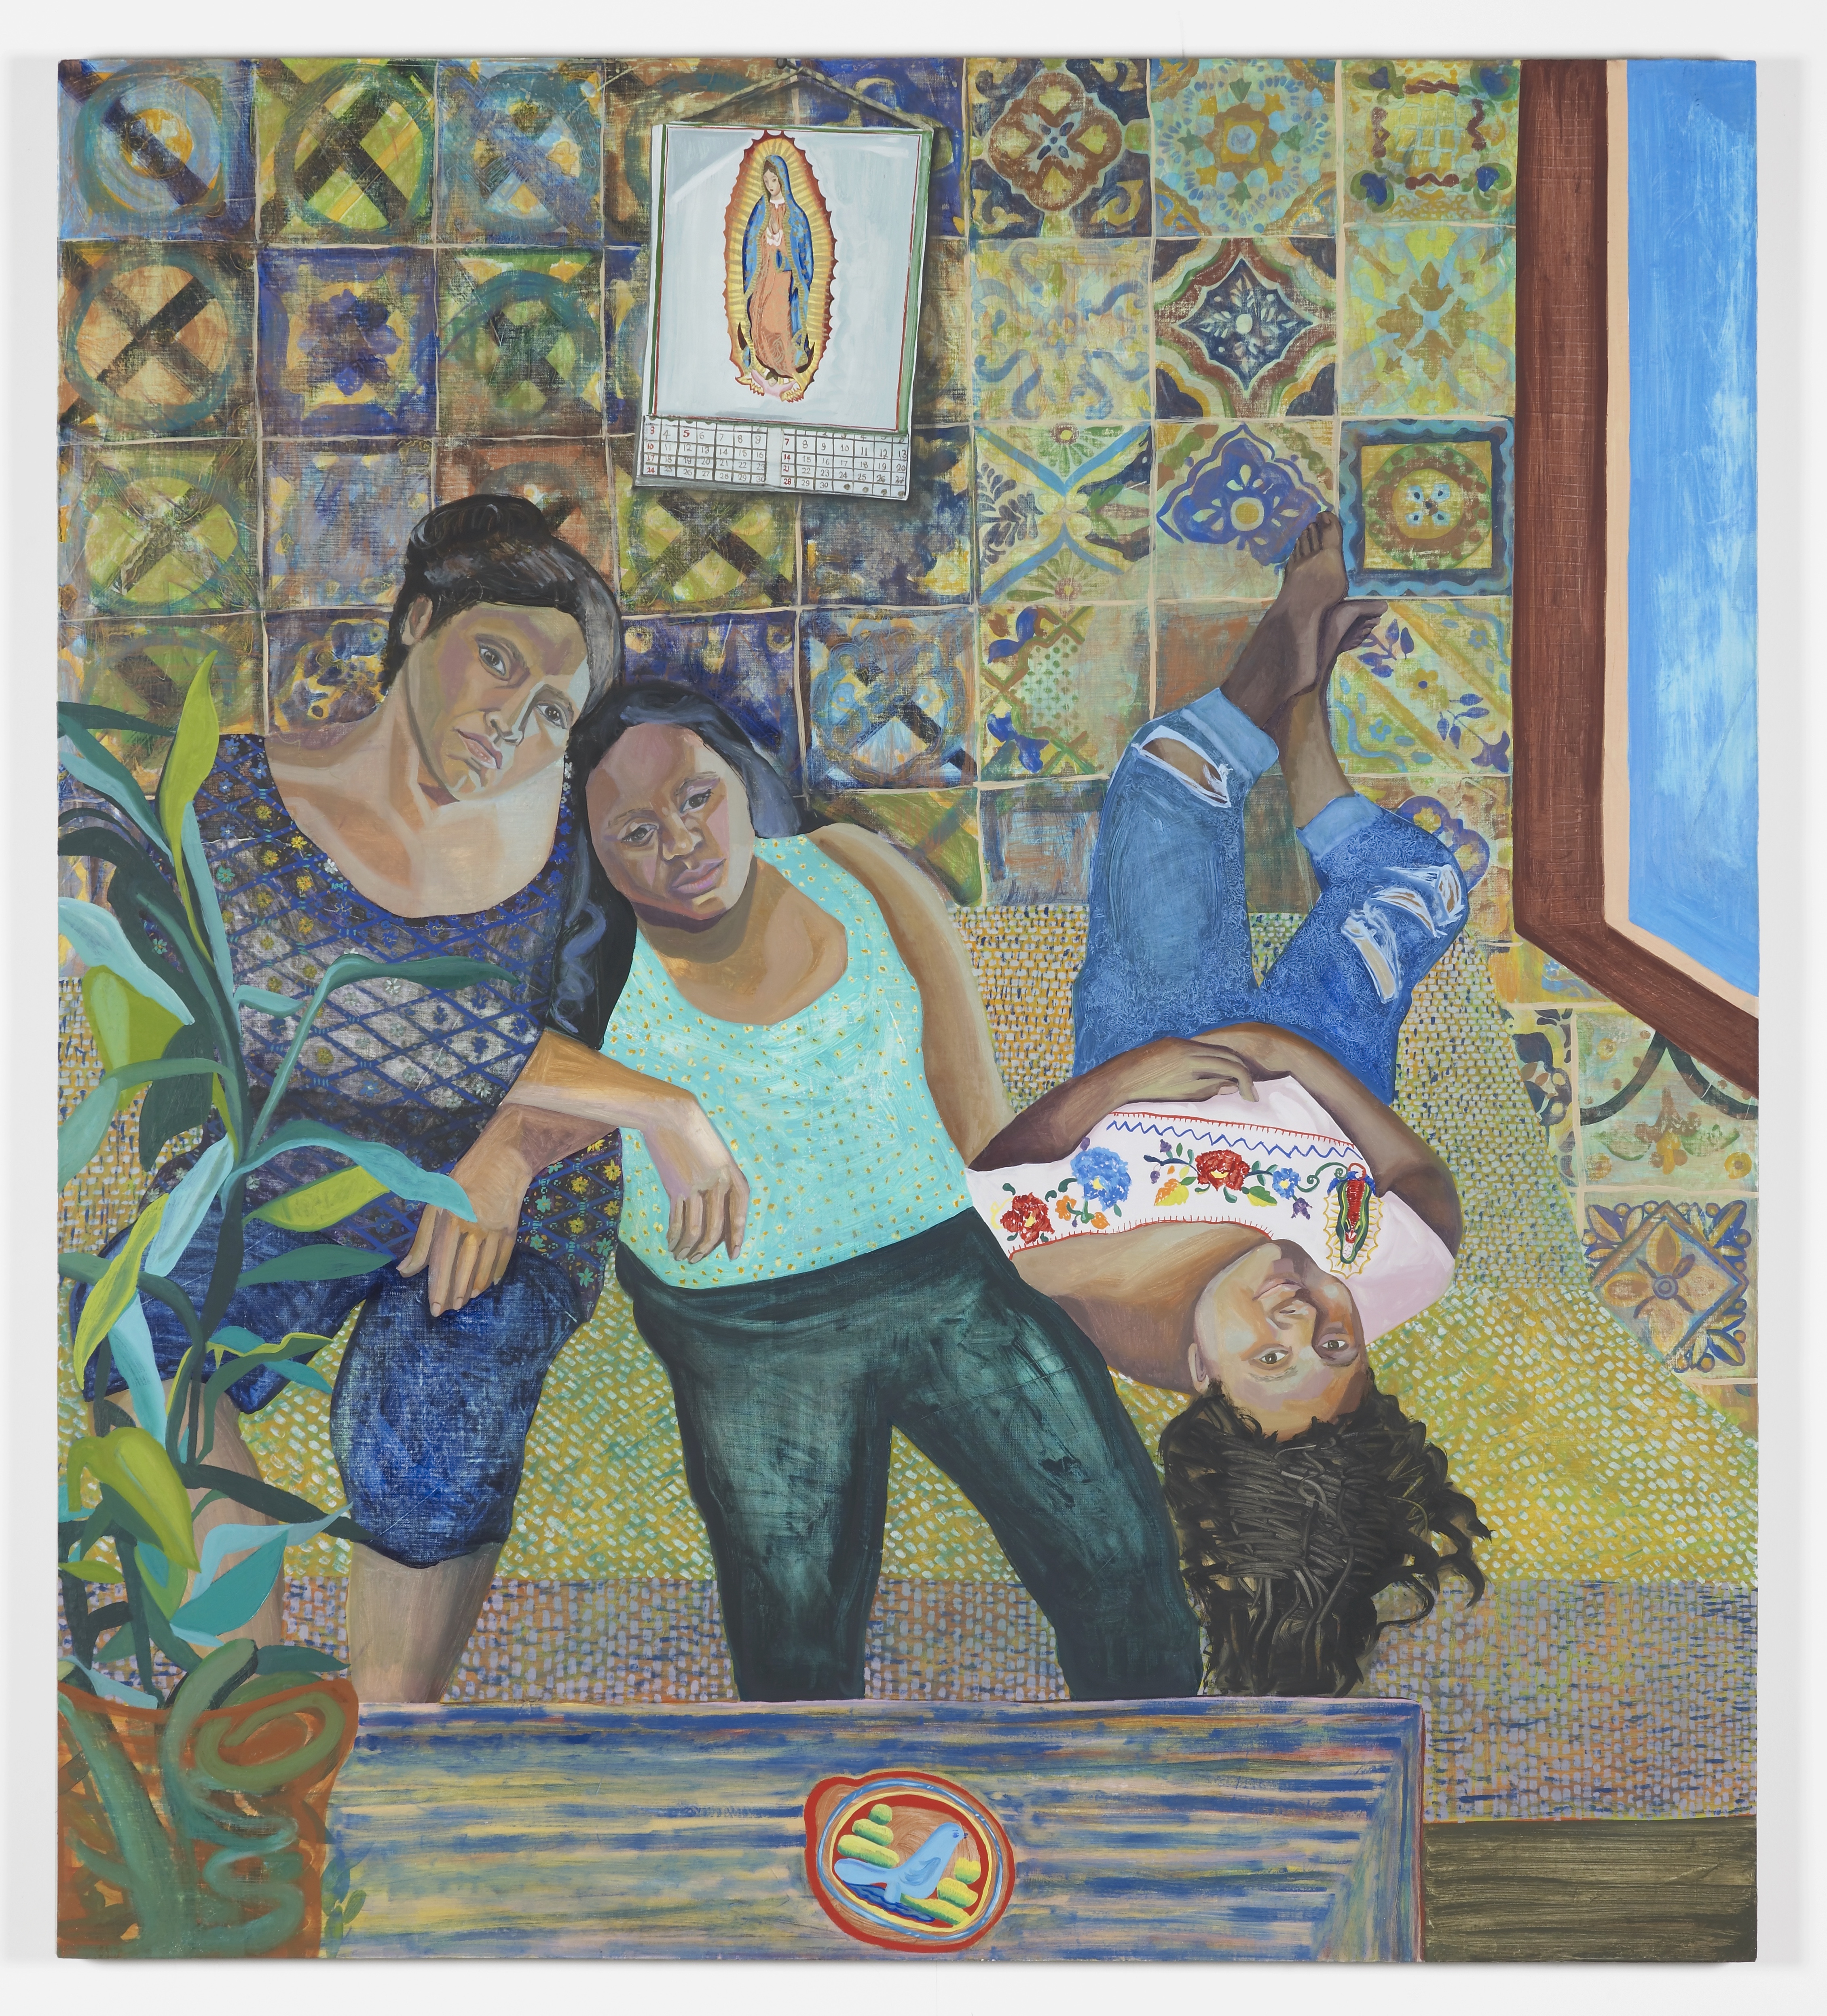 "Las Talaveritas," 2015, by Aliza Nisenbaum, will be part of the upcoming exhibition at the Cleveland Museum of Art entitled, "Picturing Motherhood Now.''
. Valeria and Gregorio Napoleone Collection. © Aliza Nisenbaum. Photo courtesy the Artist and Anton Kern Gallery, New York.